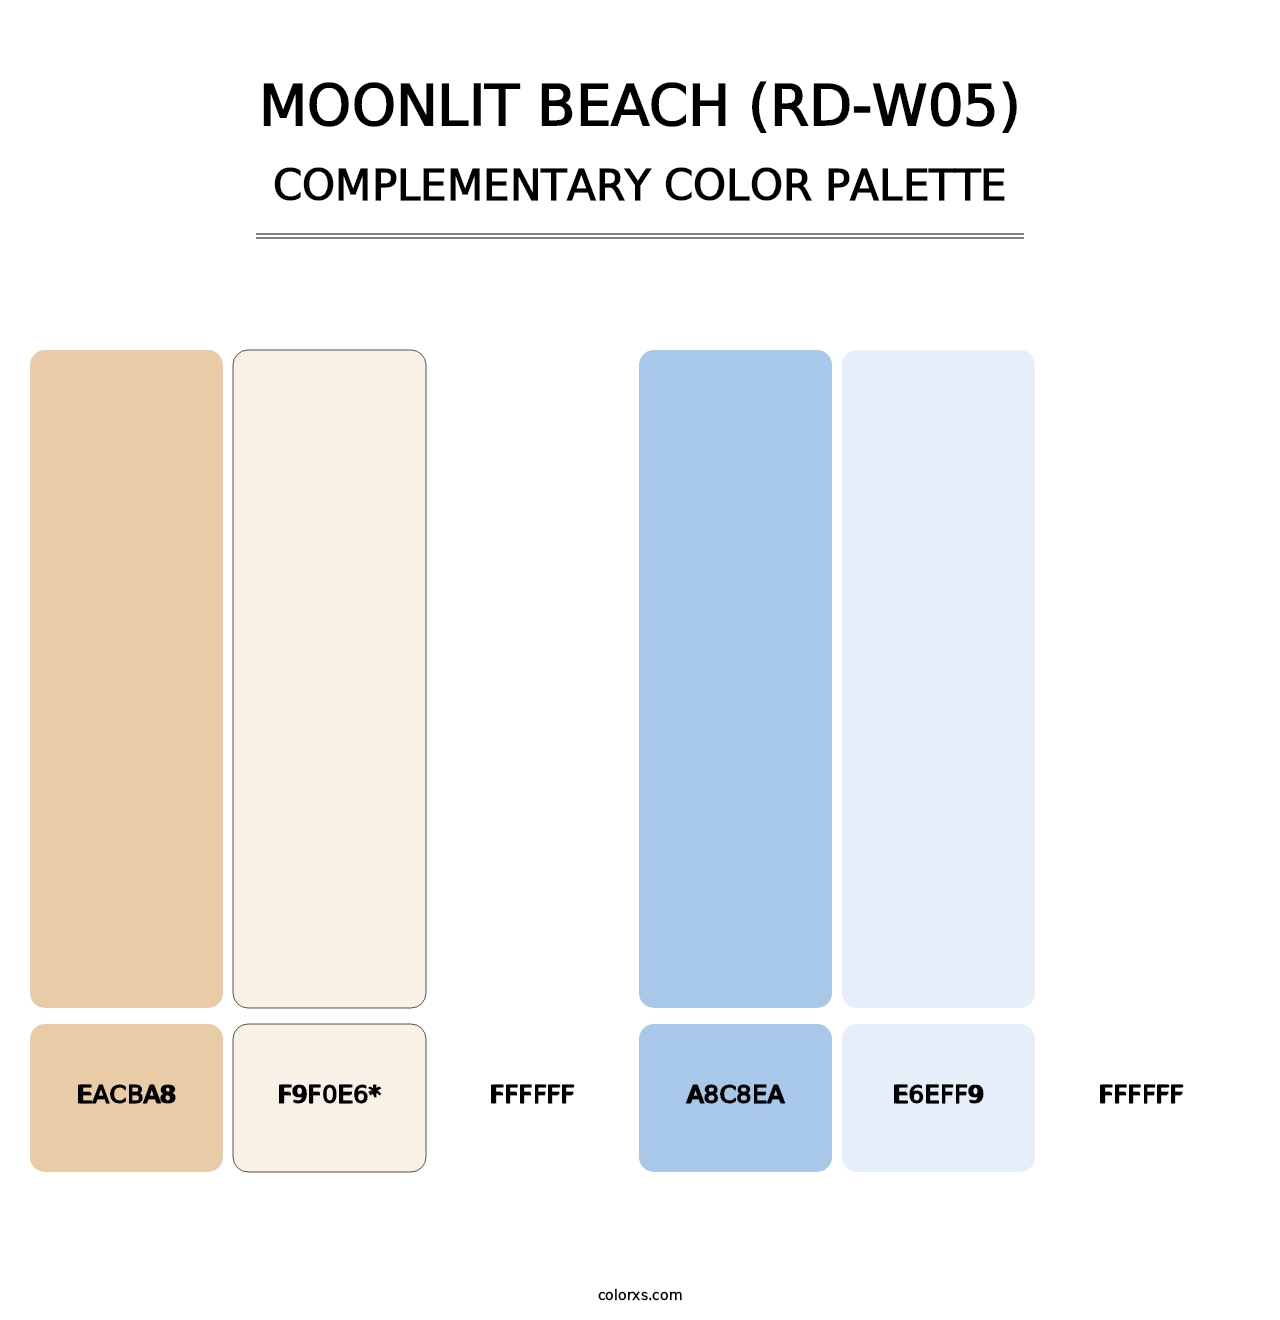 Moonlit Beach (RD-W05) - Complementary Color Palette